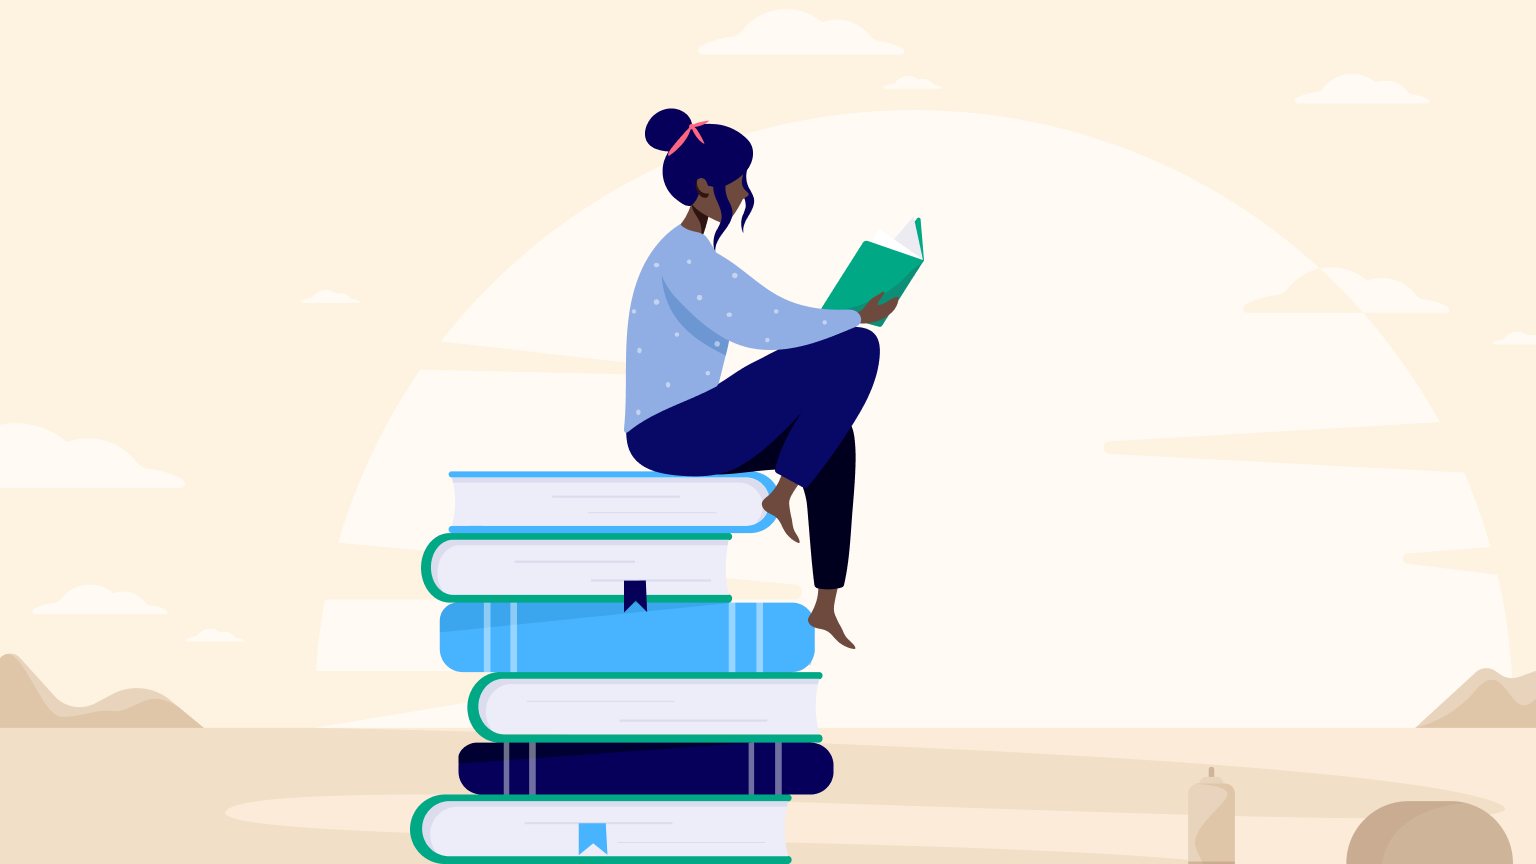 Illustration of a girl reading a book